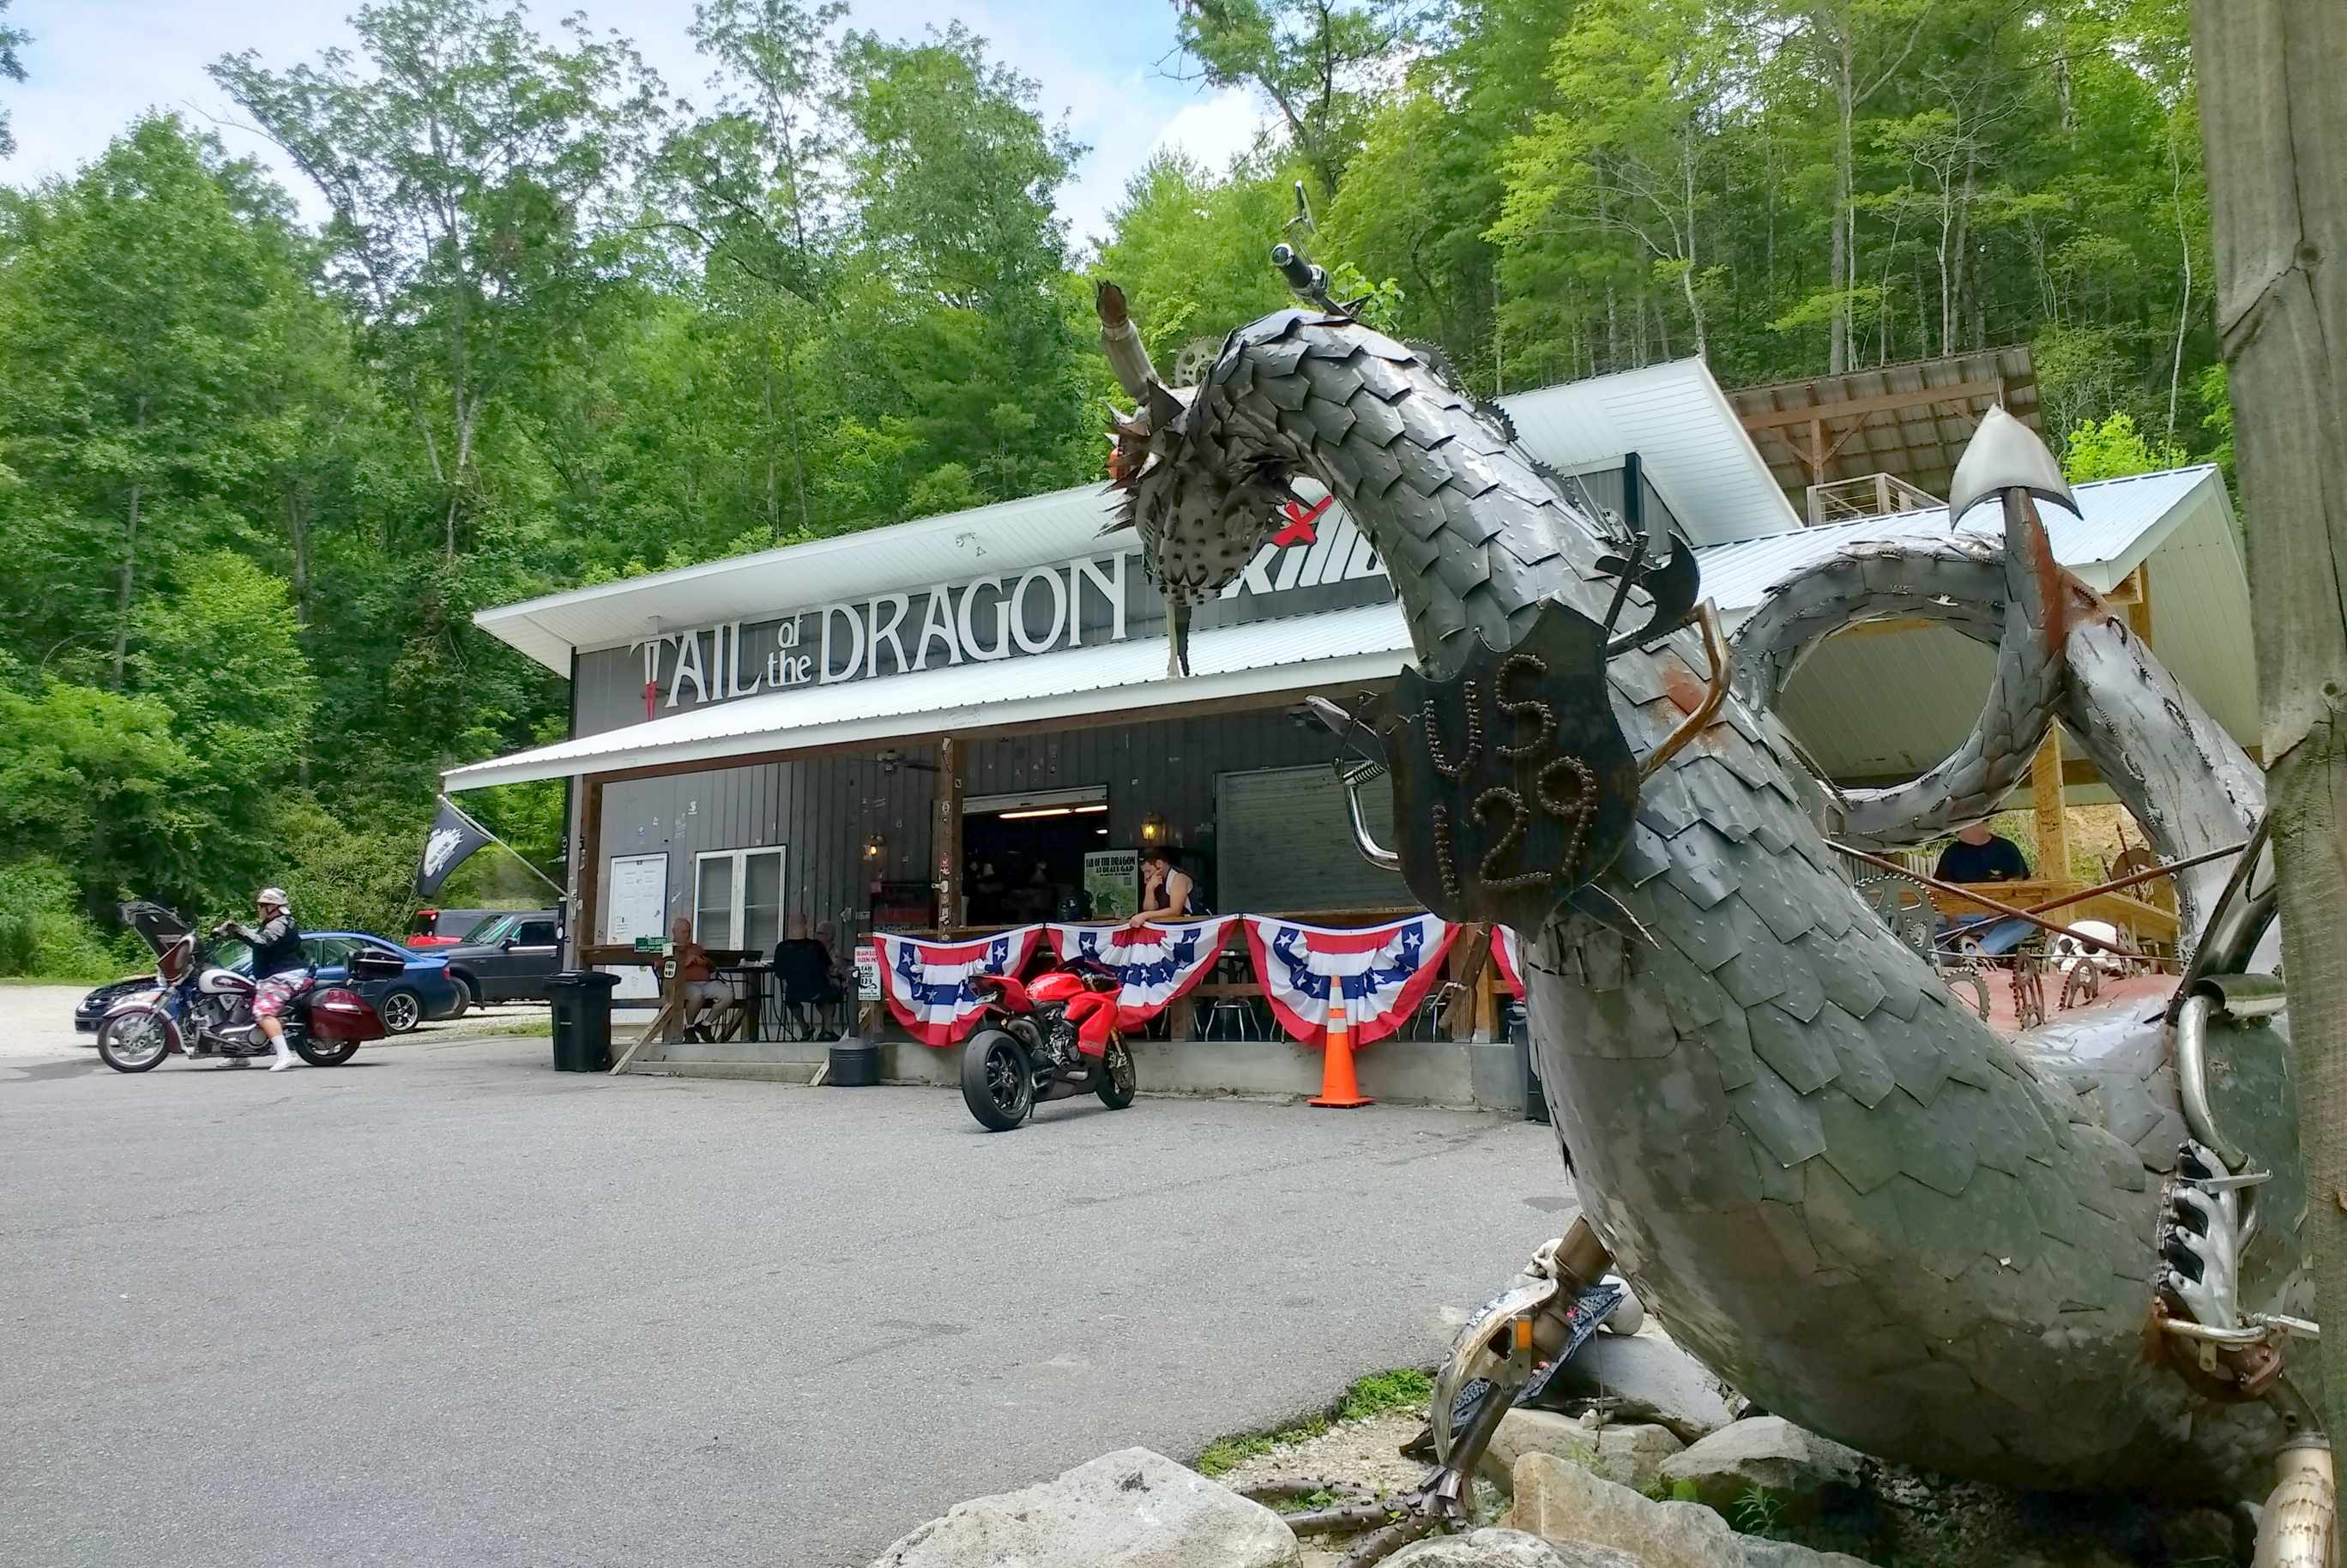 Riding U.S. Highway 129’s Tail of the Dragon in Tennessee ...